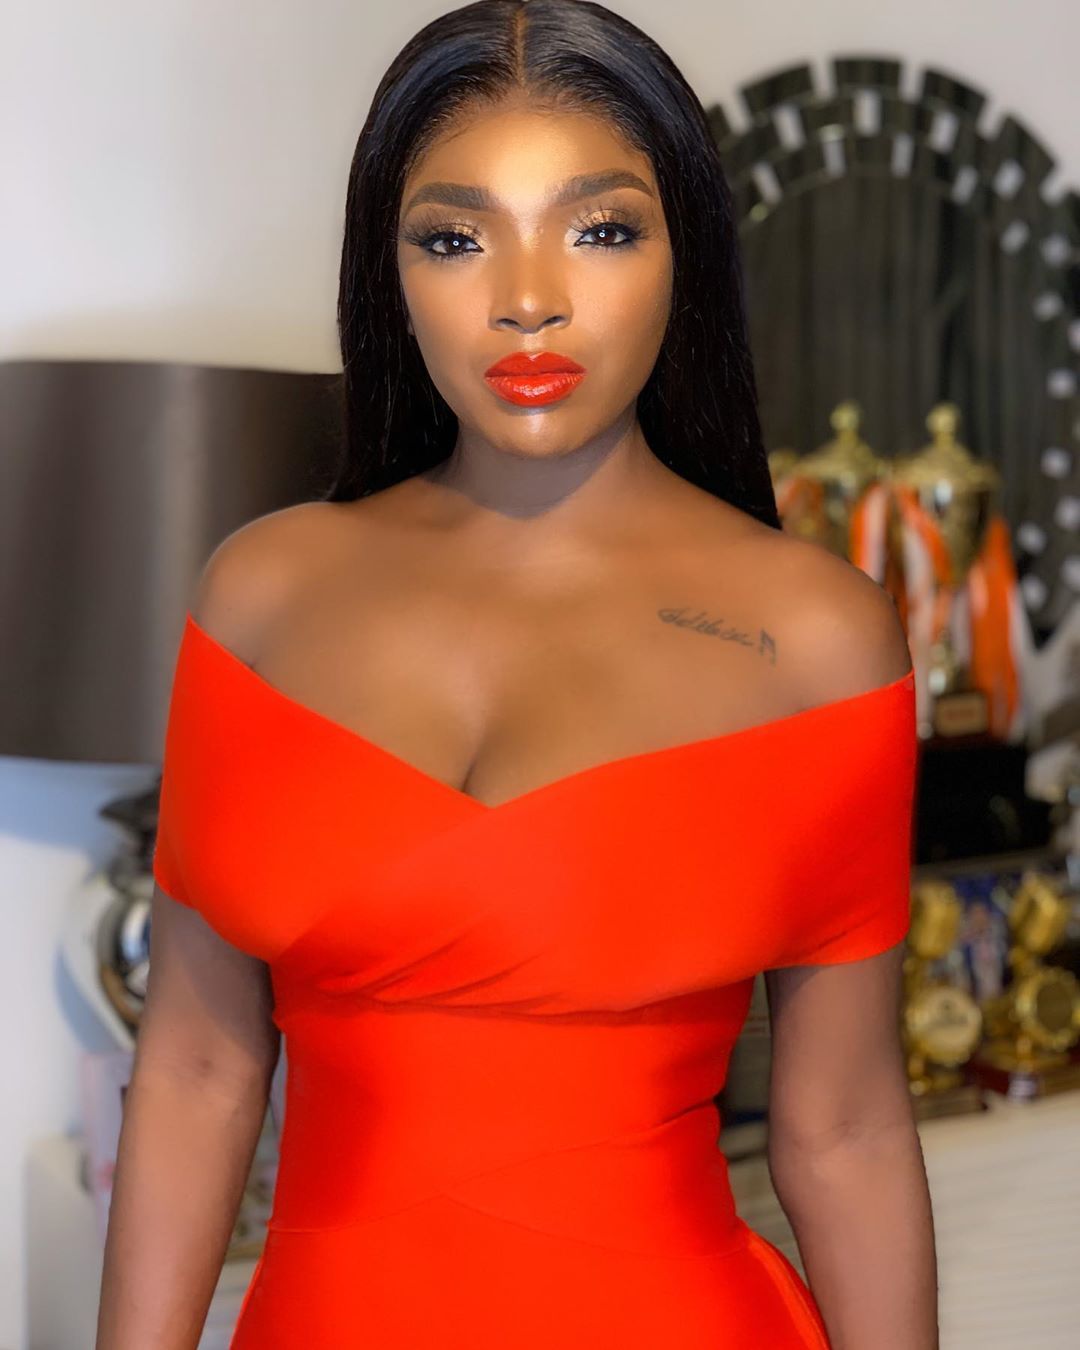 “Your juju is finally catching up with you” – Tuface’s sister-in-law, Rosemary Idibia joins in as her husband, Charles Idibia join continues slamming Annie Idibia